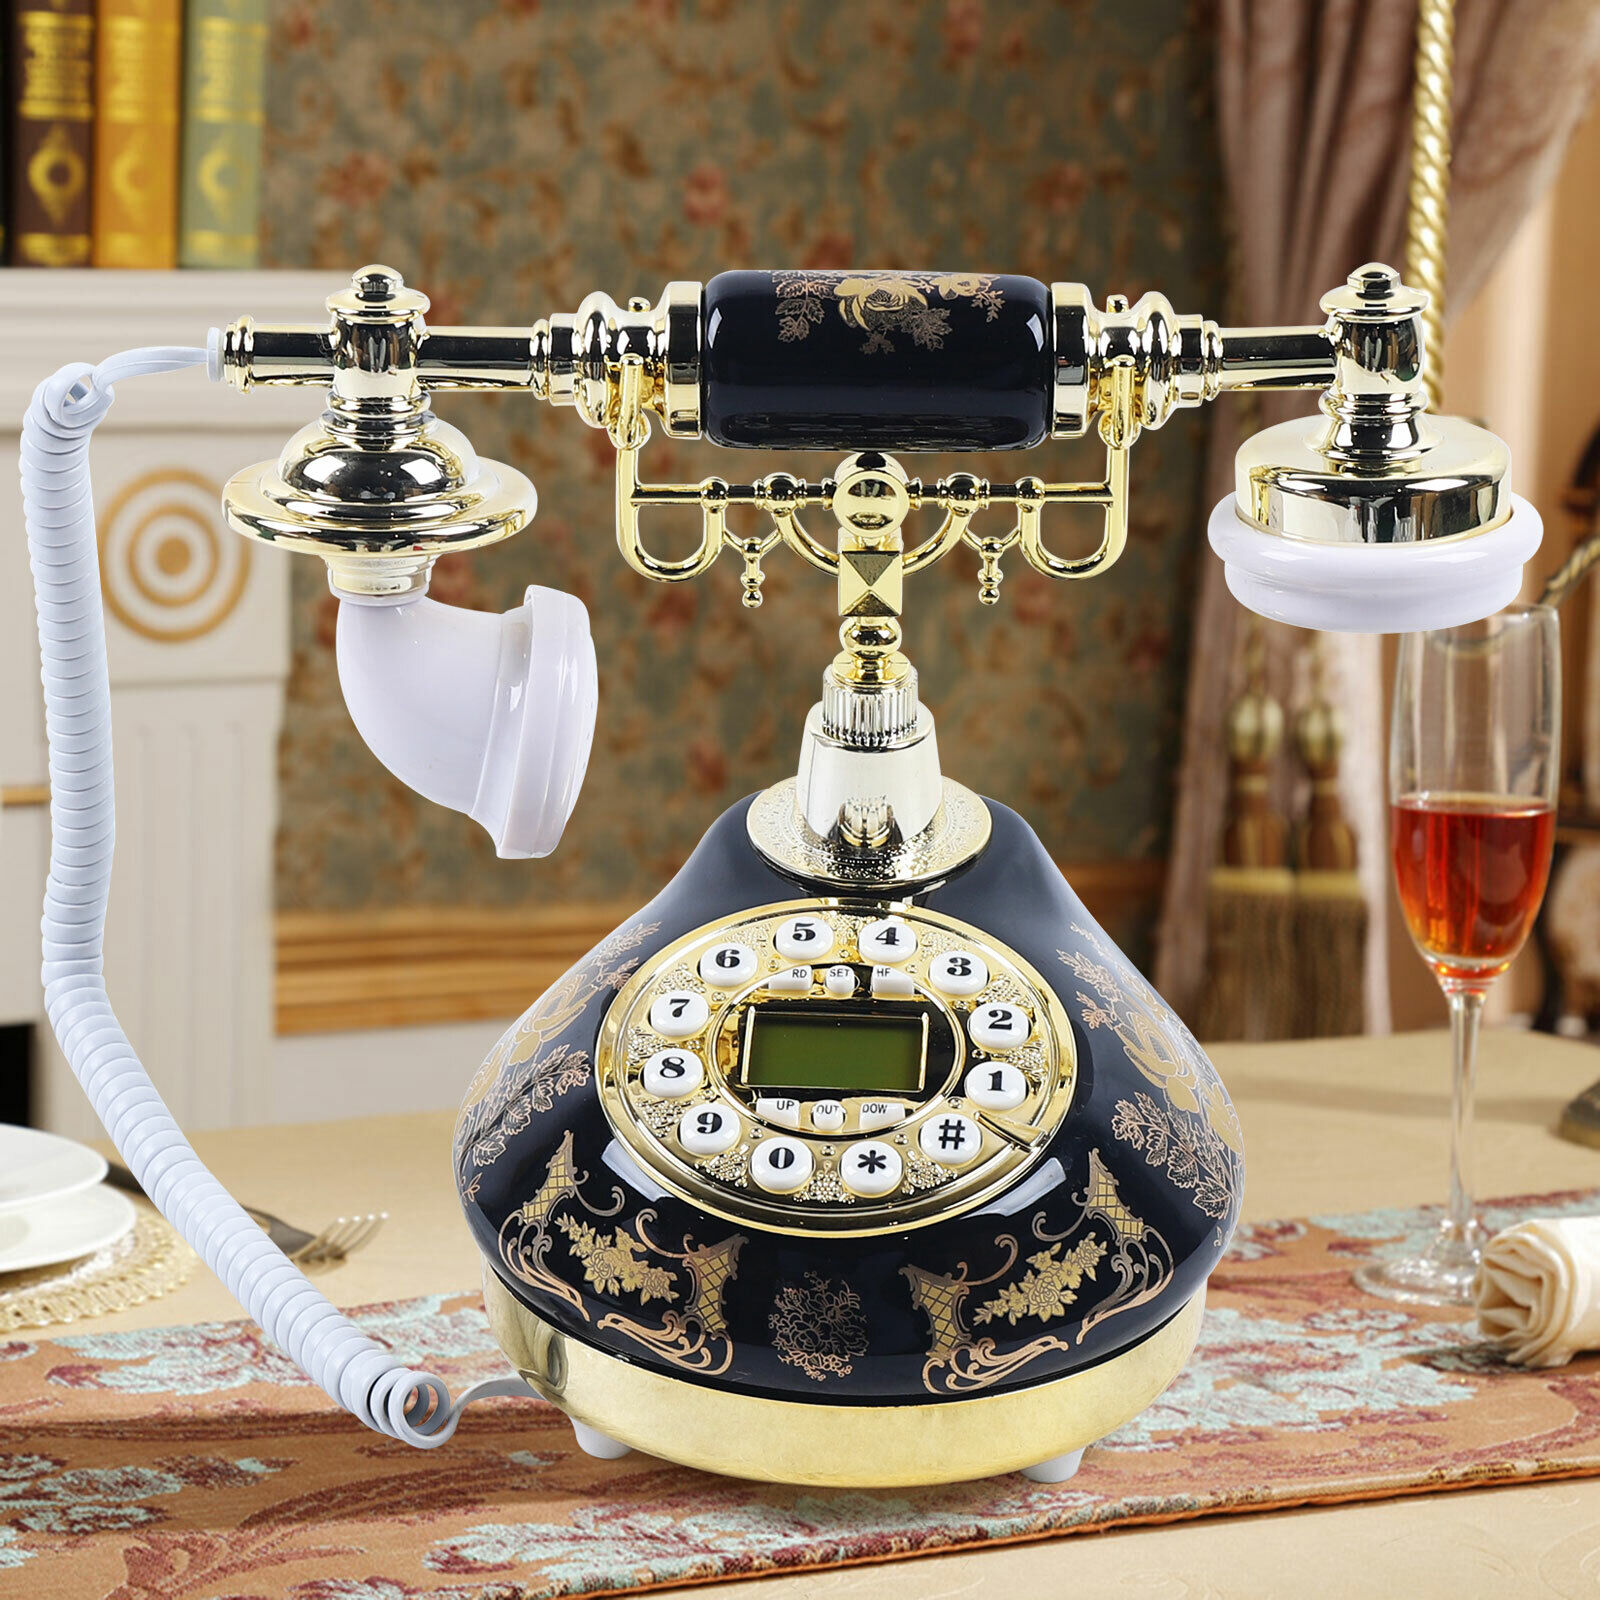 Ceramic Vintage Style Button Telephone Phone Real Working Vintage Fashion Decor